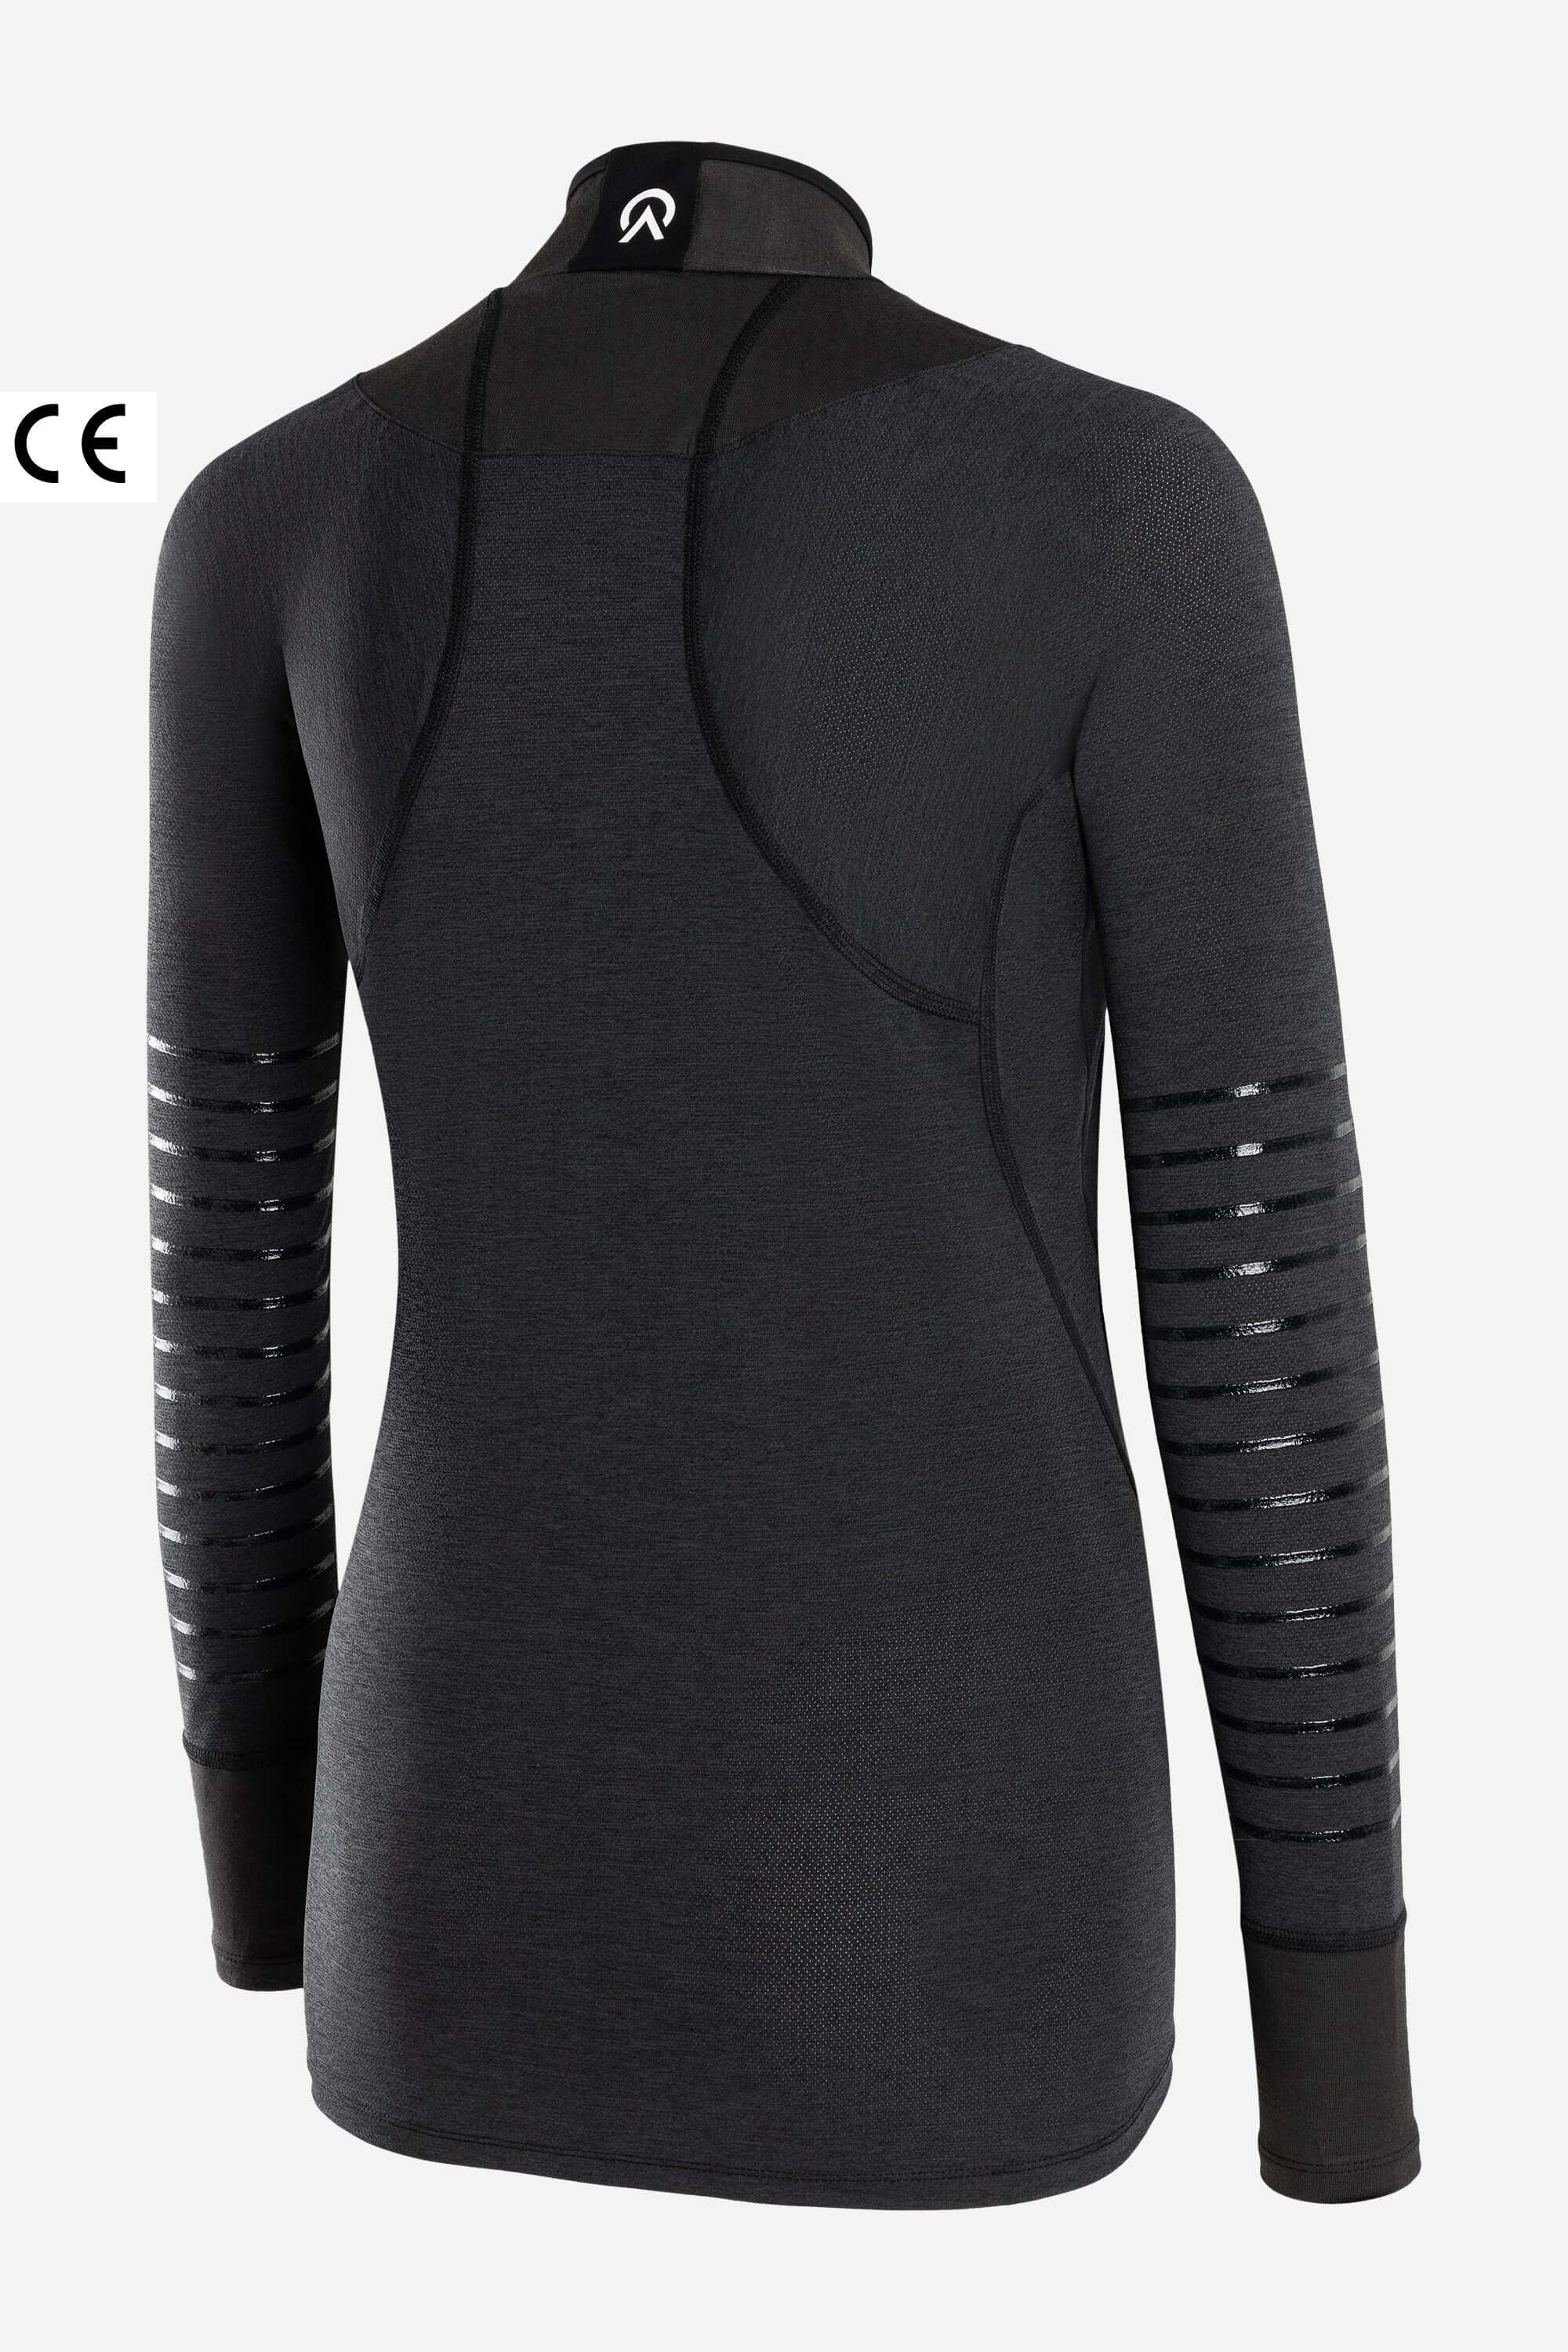 Black women hockey base layer with cut resistant neck guard and cuts, 3d silicon stripes on the sleeve